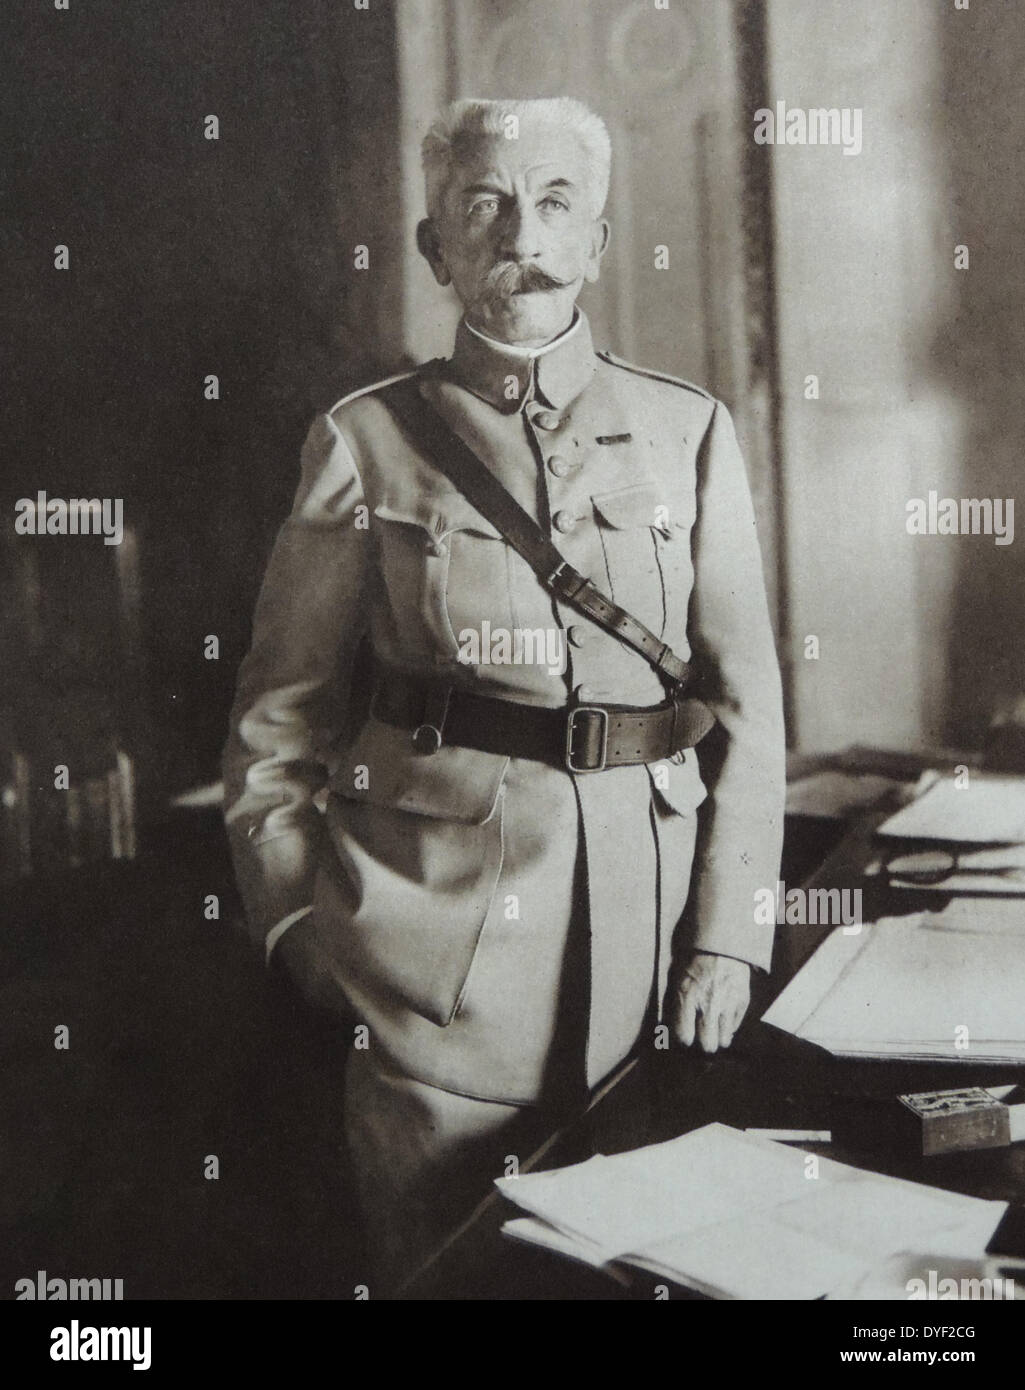 Louis Hubert Gonzalve Lyautey (17 November 1854 – 21 July 1934) was a French Army general, the first French Resident-General in Morocco from 1912 to 1925, and from 1921 a Marshal of France. He was dubbed the Maker of Morocco and the French empire builder, and in 1931 made the cover of Time. Stock Photo